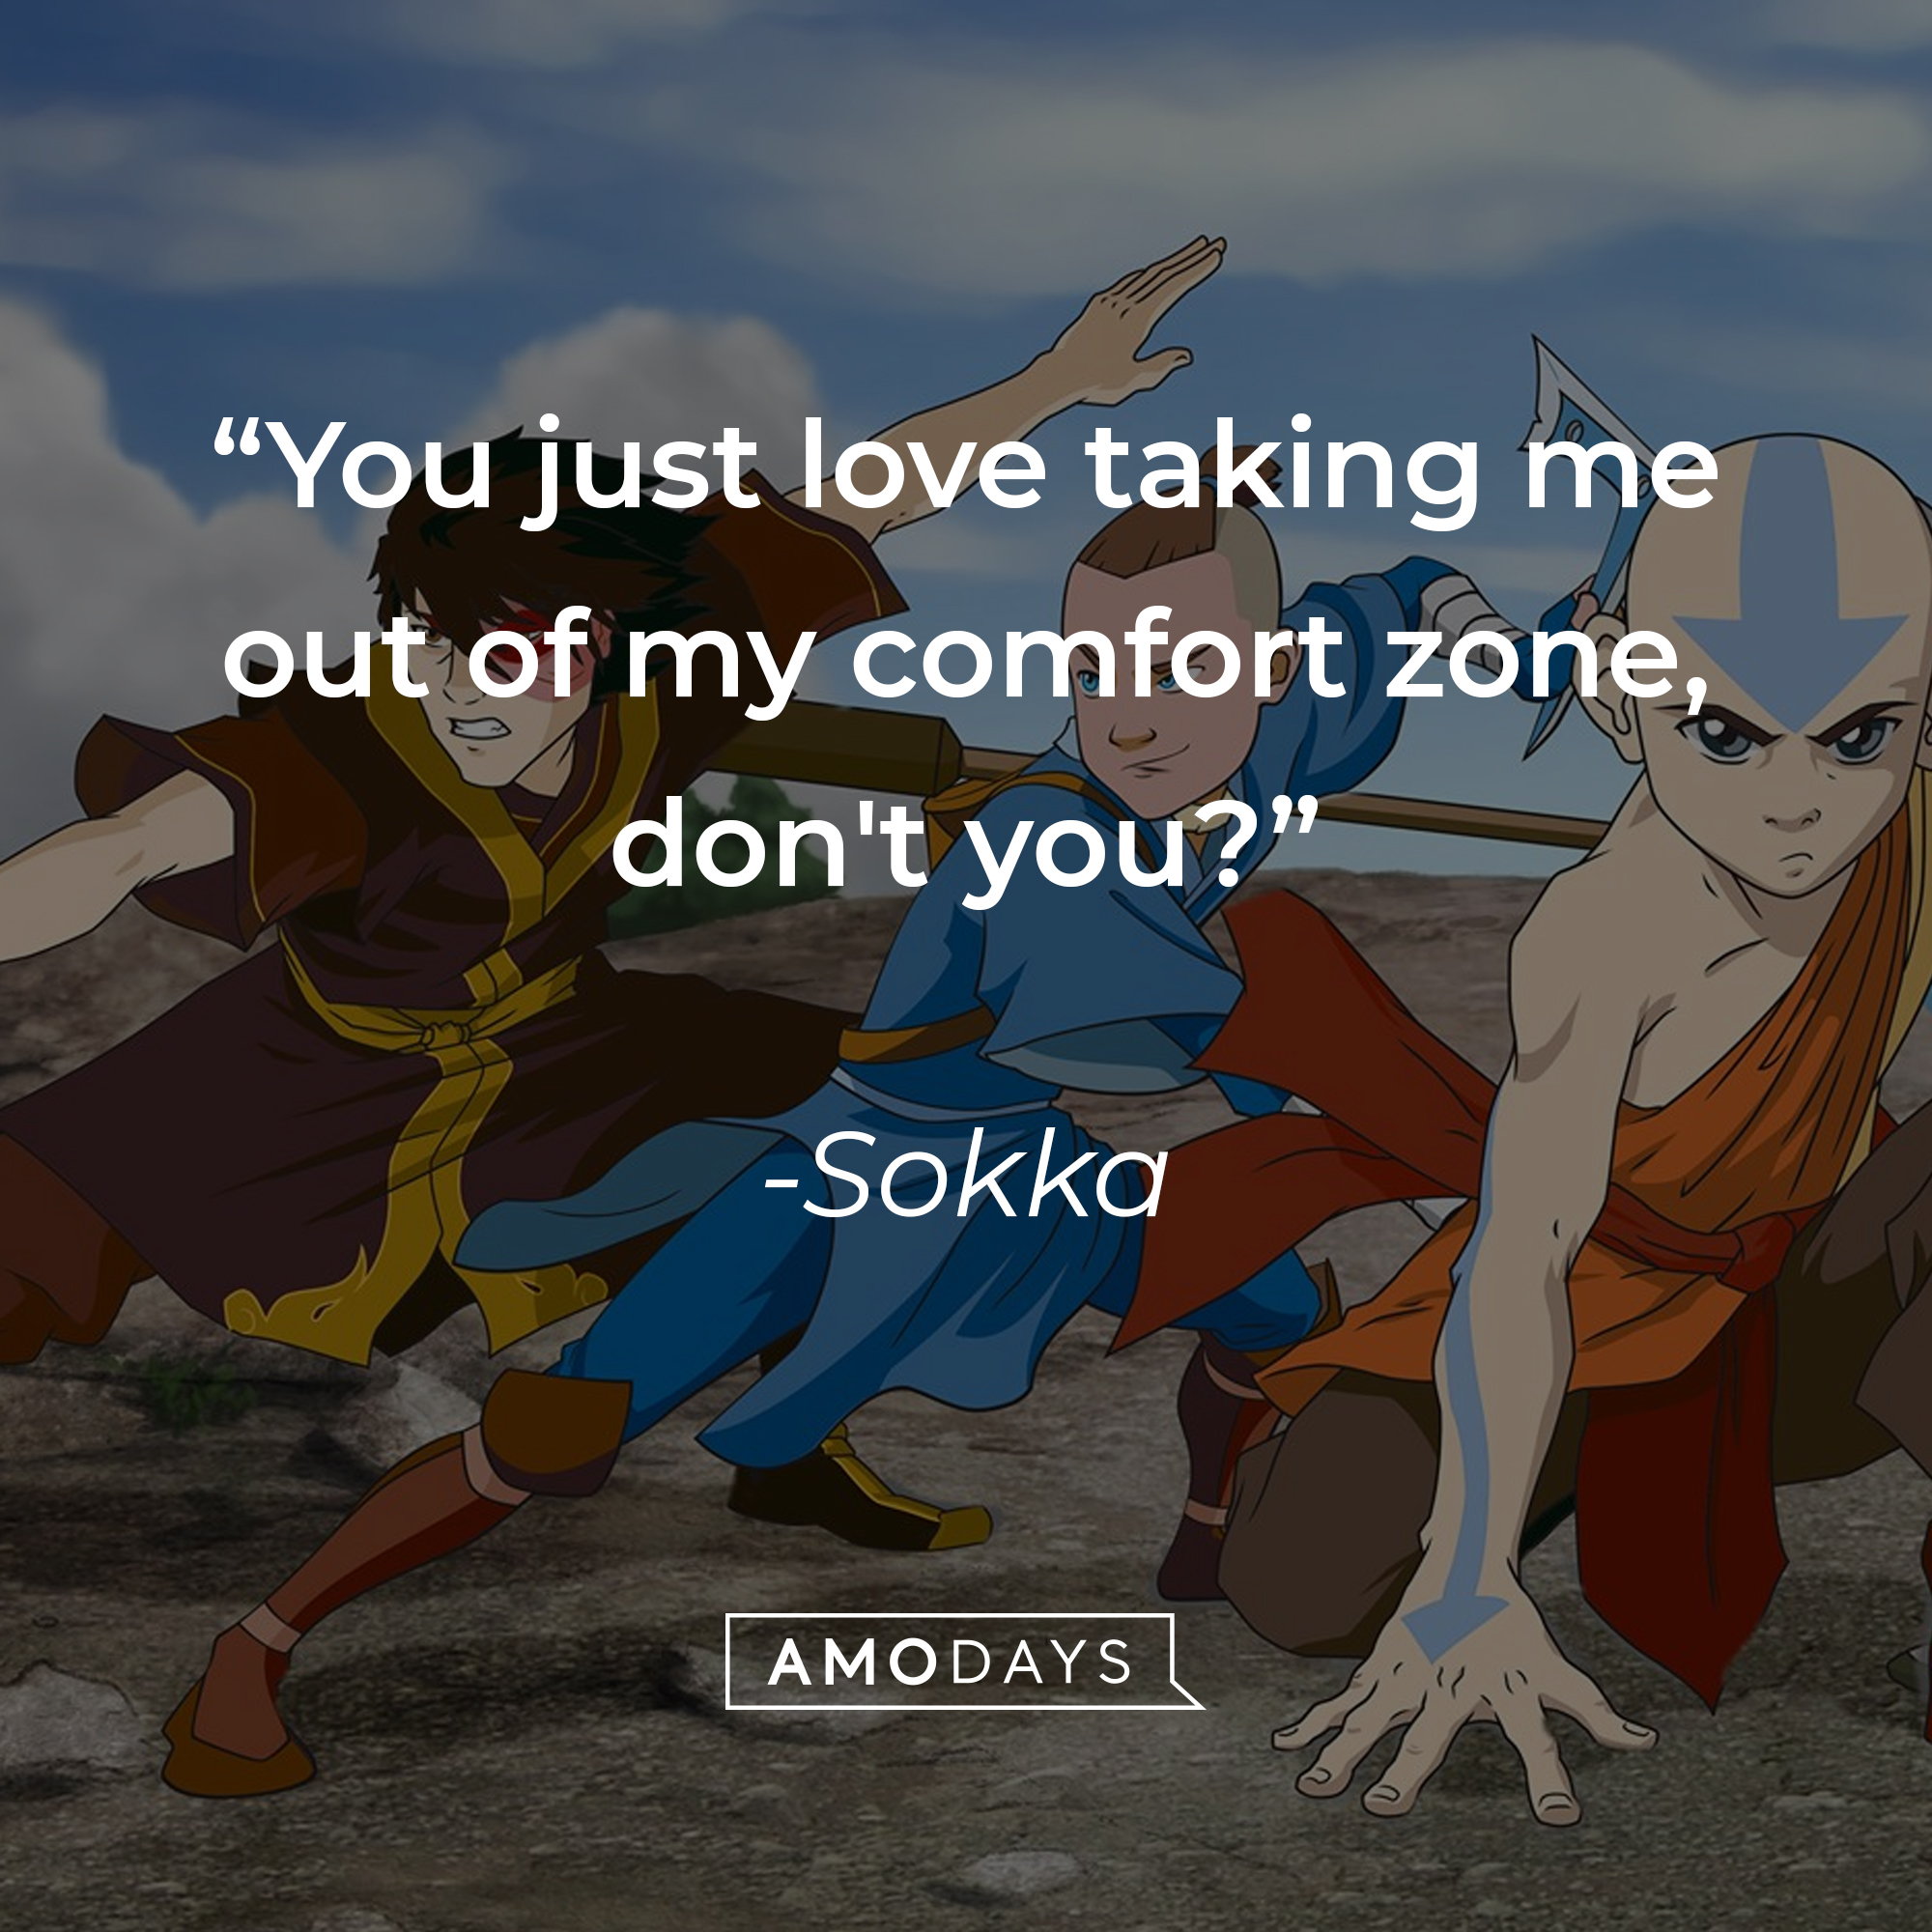 Sokka's quote: "You just love taking me out of my comfort zone, don't you?" | Source: facebook.com/avatarthelastairbender